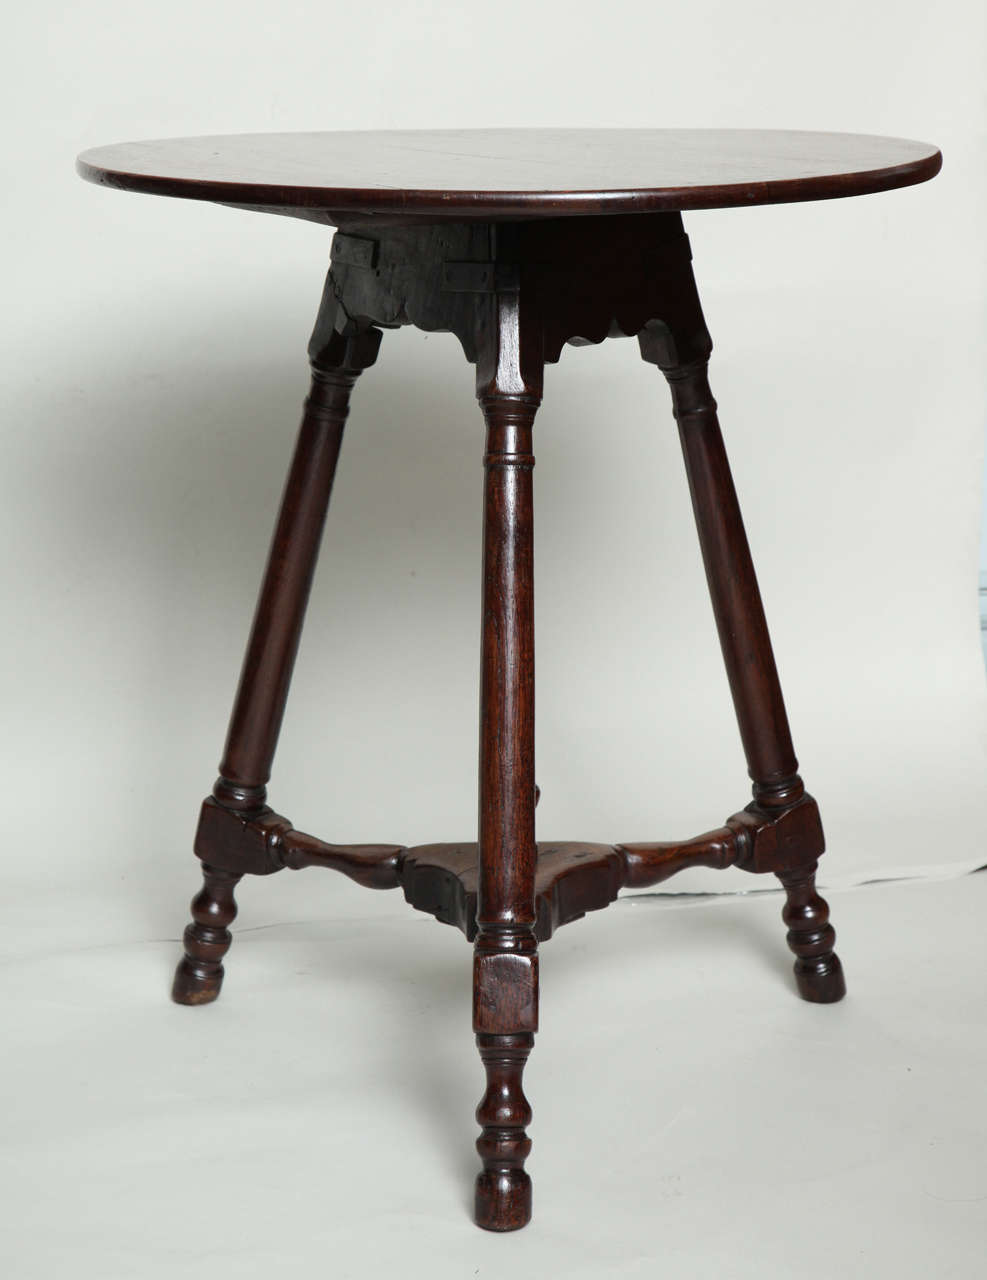 Unusual 18th century Welsh oak cricket table, the circular top with bullnose edge, over cupid bow scalloped apron, the three balustrade turned splayed legs joined by turned three spoke stretcher base having a turned central finial, several old iron